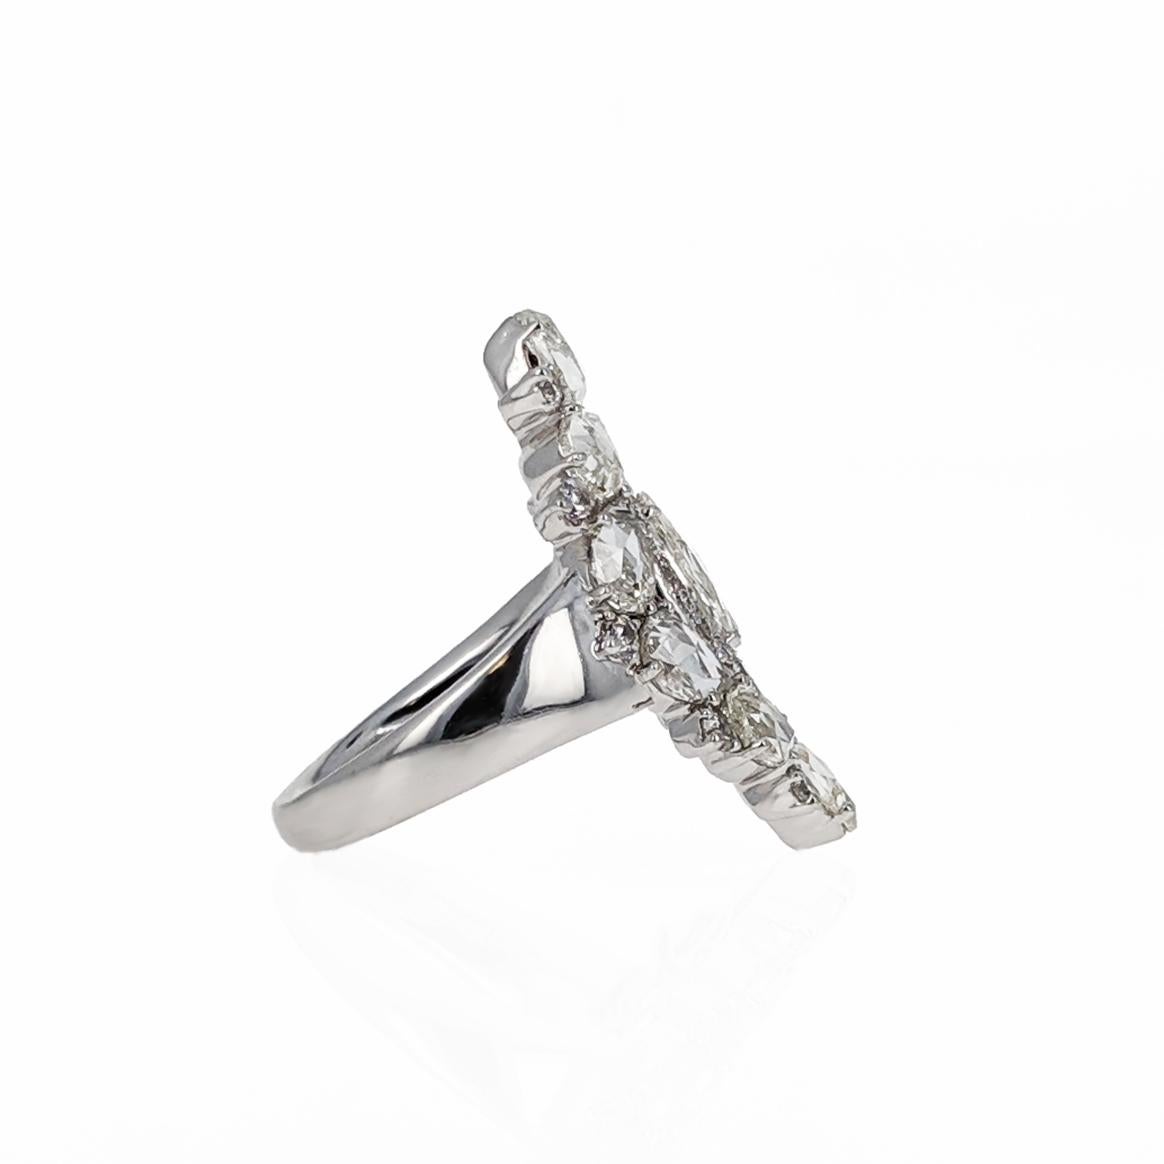 Navette in shape, set with rose-cut and single-cut diamonds weighing approximately 6 carats. Mounted in 18 karat white gold. Signed Sutra. 
Size 7.

It's ethereal look with its subdued yet elegant rose-cuts and wide symmetrical design create a